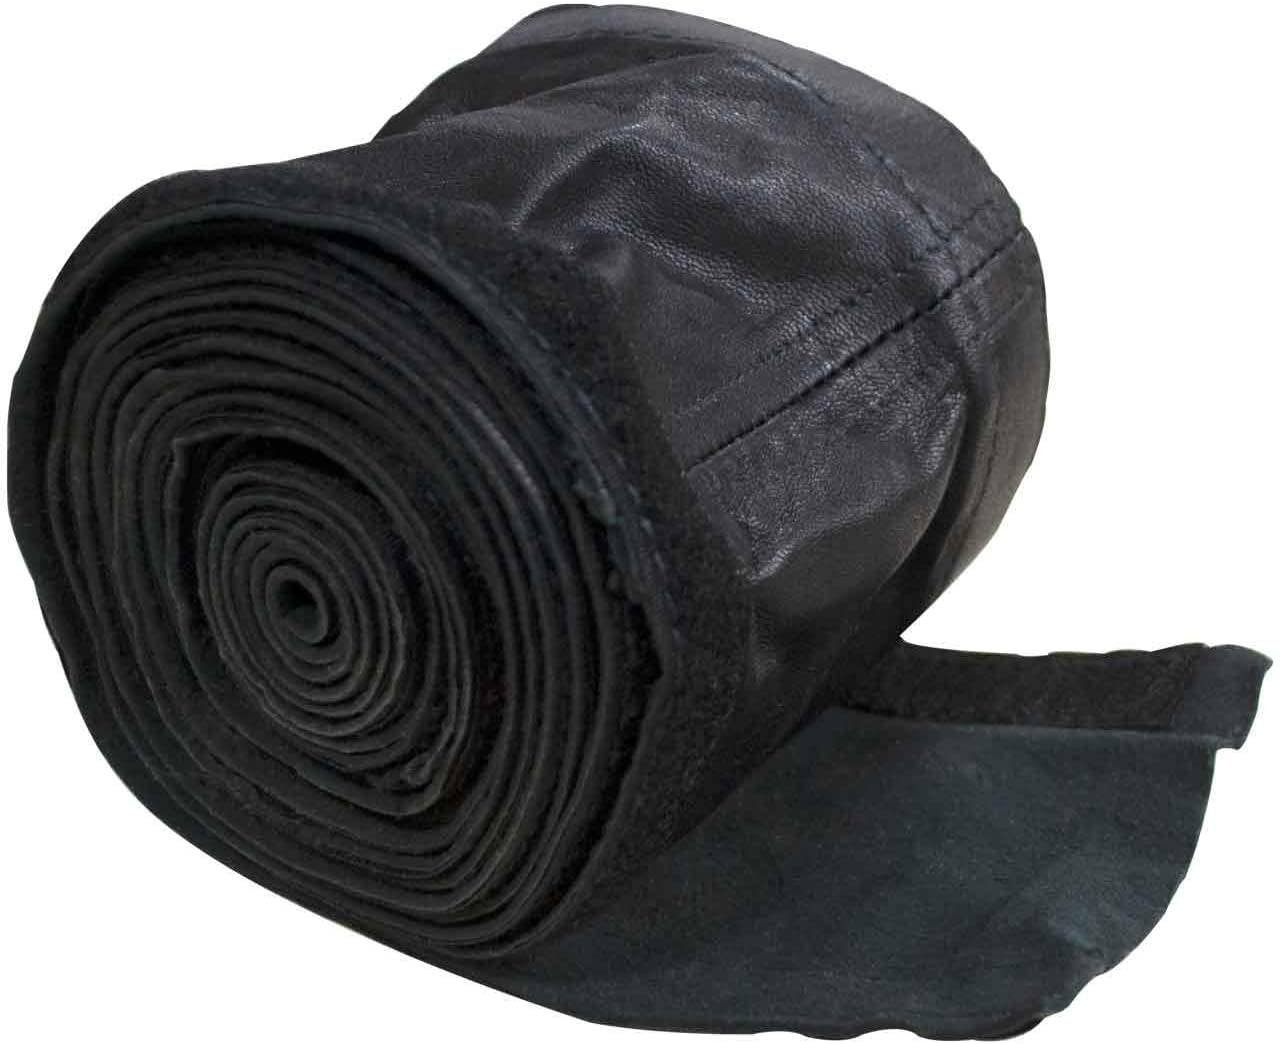 *CK Worldwide CK 312HCLV Hose Cover 10' Leather w/ velcro (4-1/2")